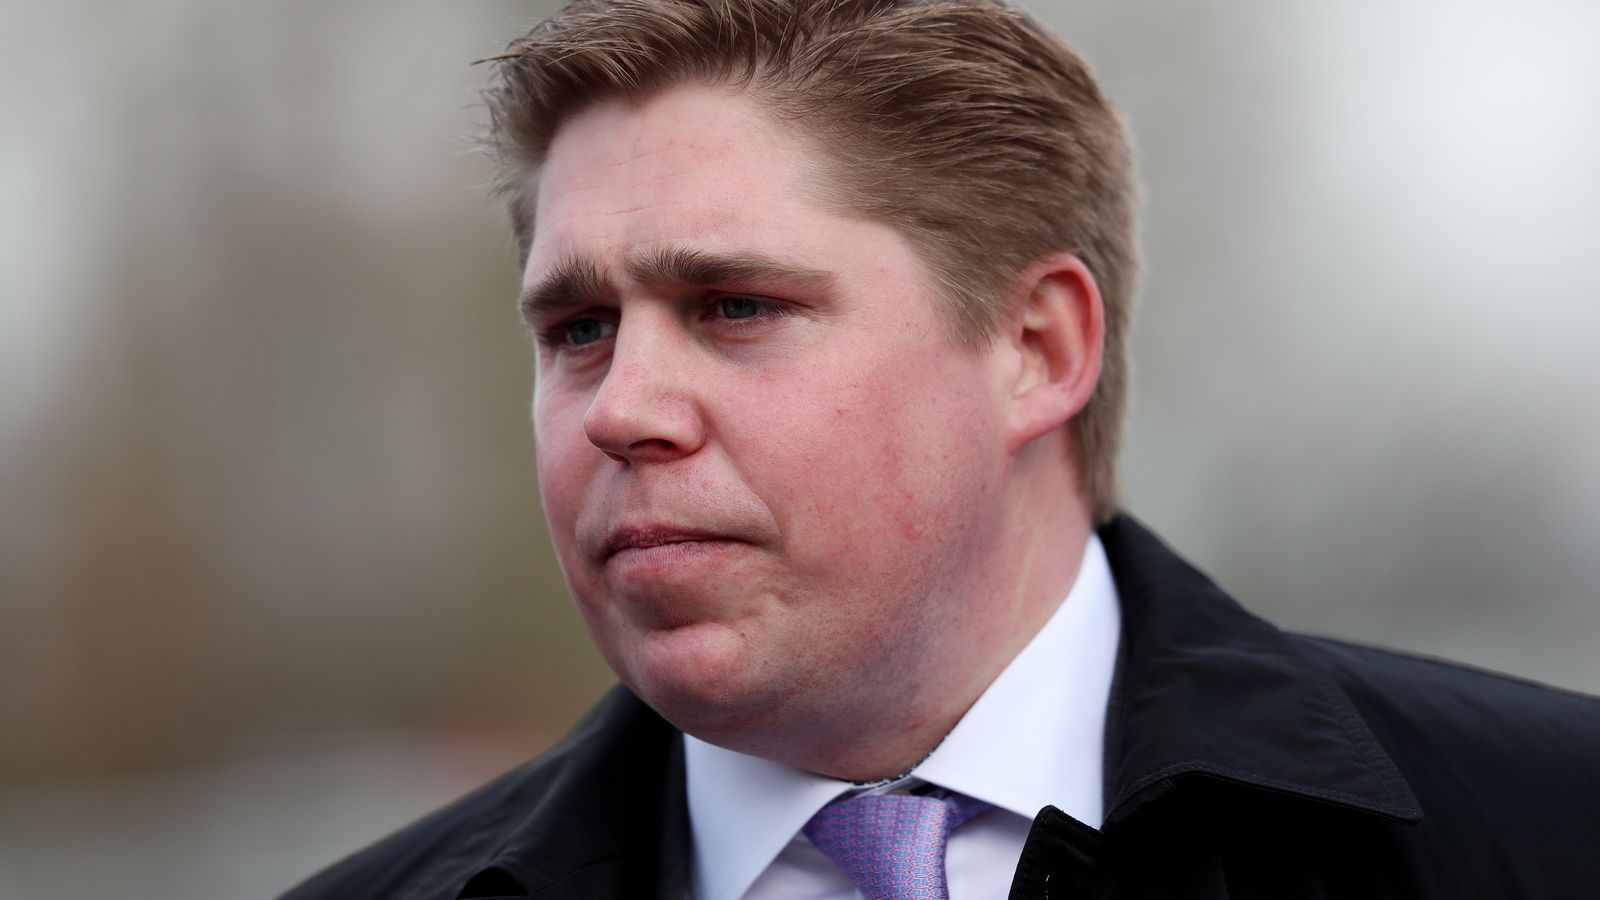 Dan Skelton fined £6,000 after ‘attempt to mislead’ BHA in George Gently investigation